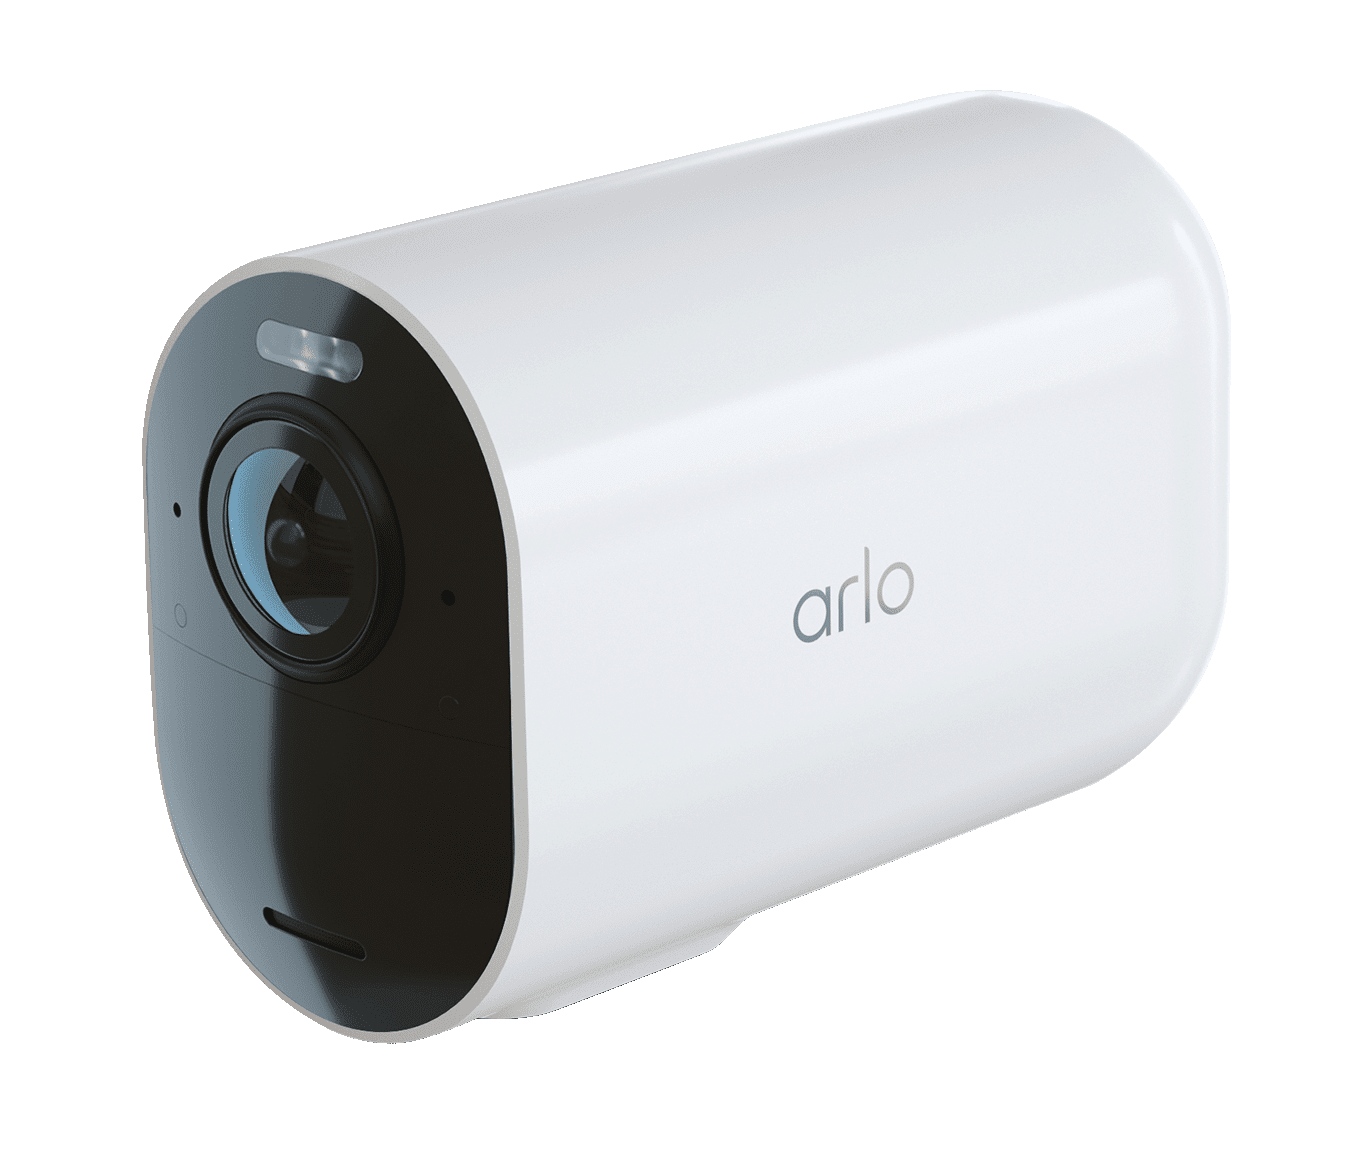 straight ahead Measurable Pull out Arlo, your Home Security Surveillance Cameras Expert in Europe